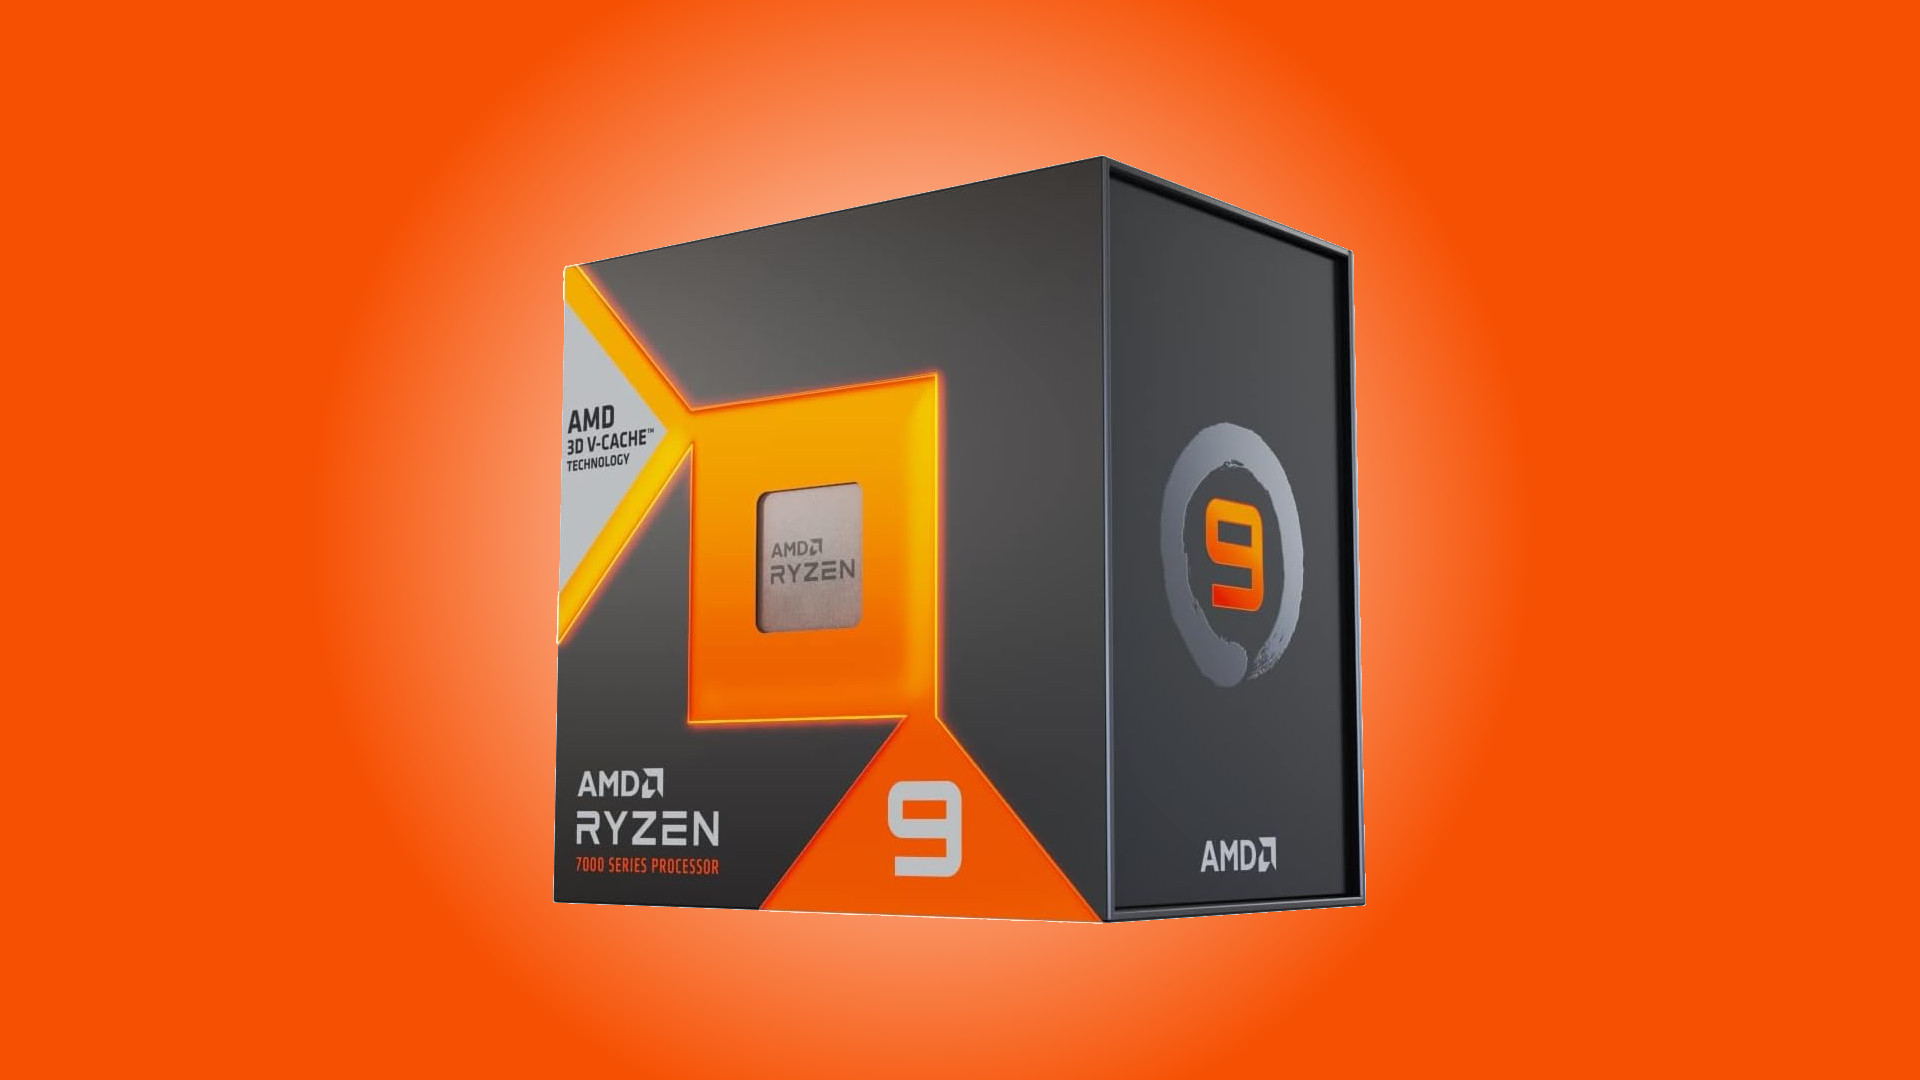 Score an AMD Ryzen 9 7900X3D CPU now for its lowest ever price